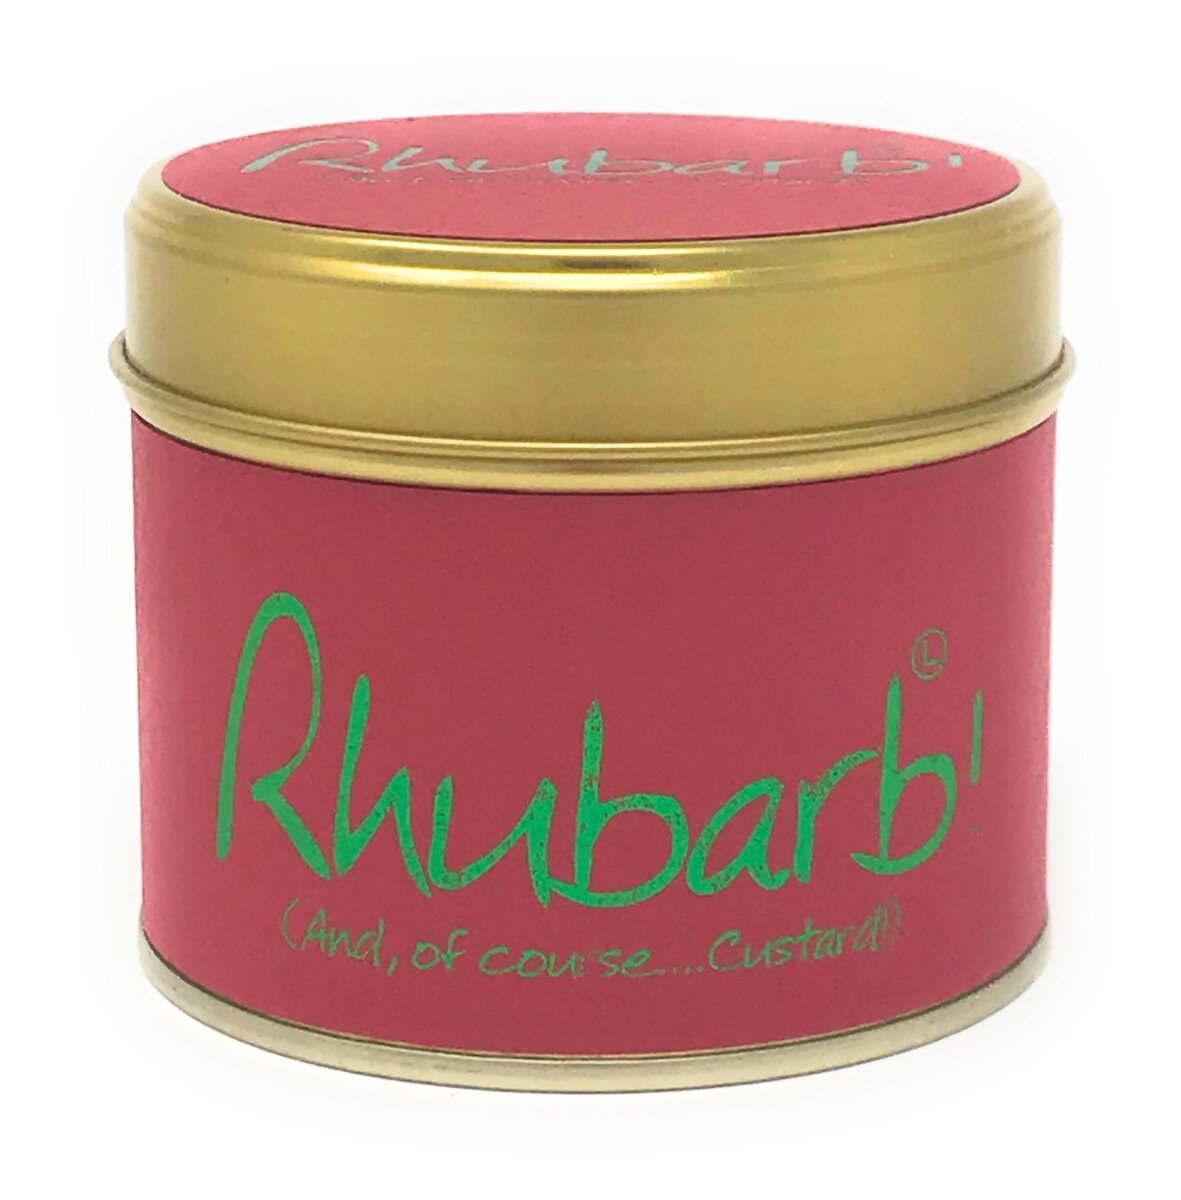 Rhubarb Scented Candle